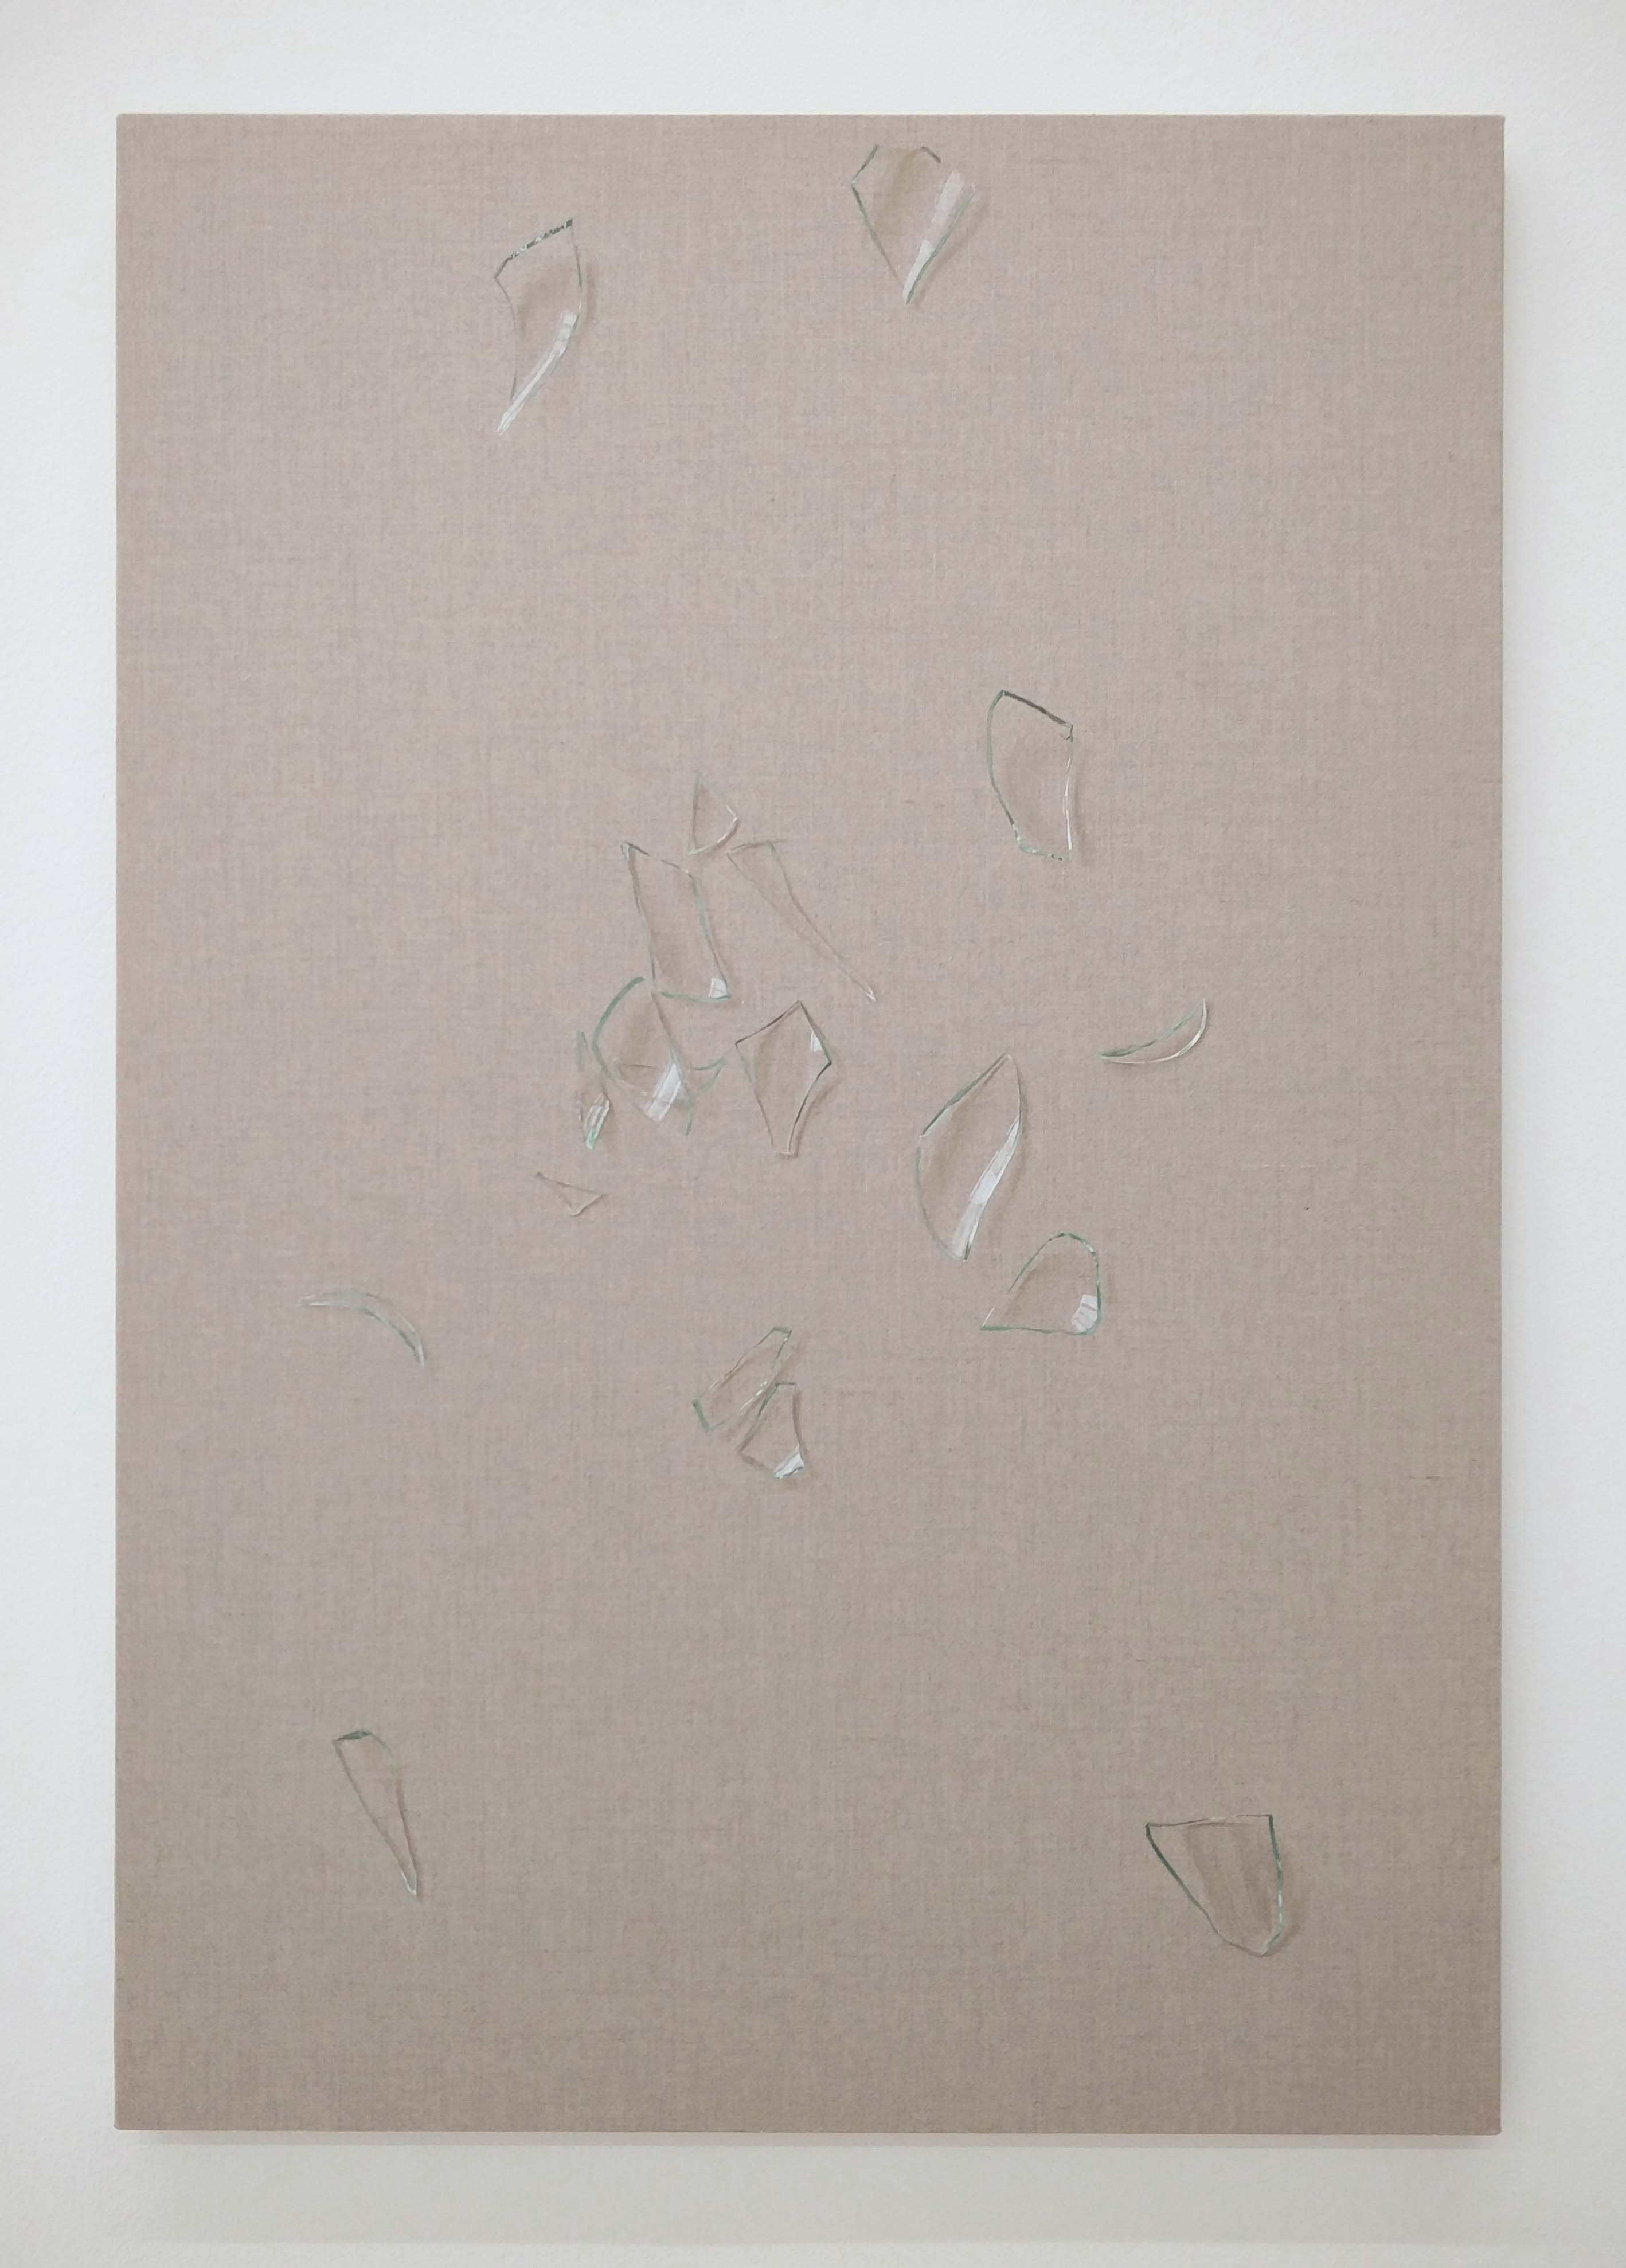 #Helene_Appel - washing up - review by #ARTIFICIALIS - 